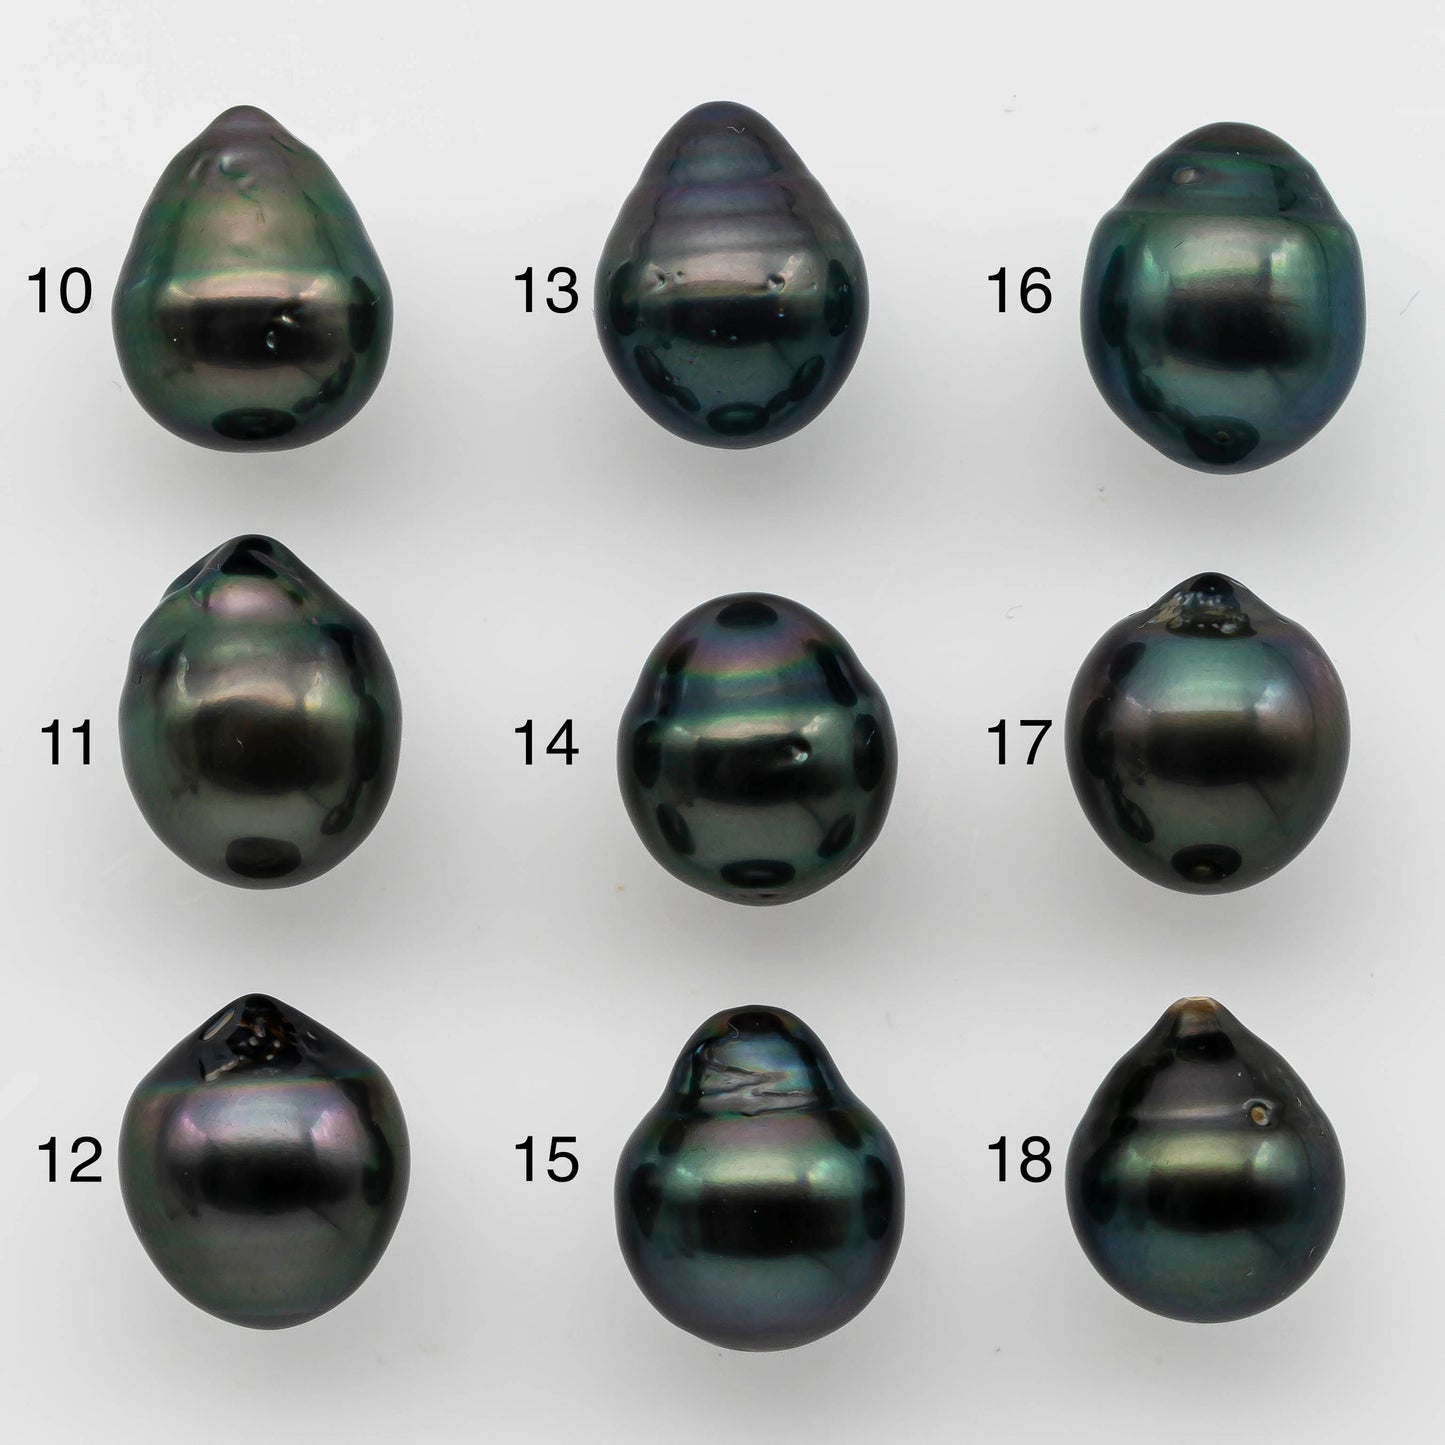 10-11mm Loose Tahitian Pearl Tear Drops Single Piece Undrilled in Natural Color and Nice Luster with Flaws, SKU # 1491TH